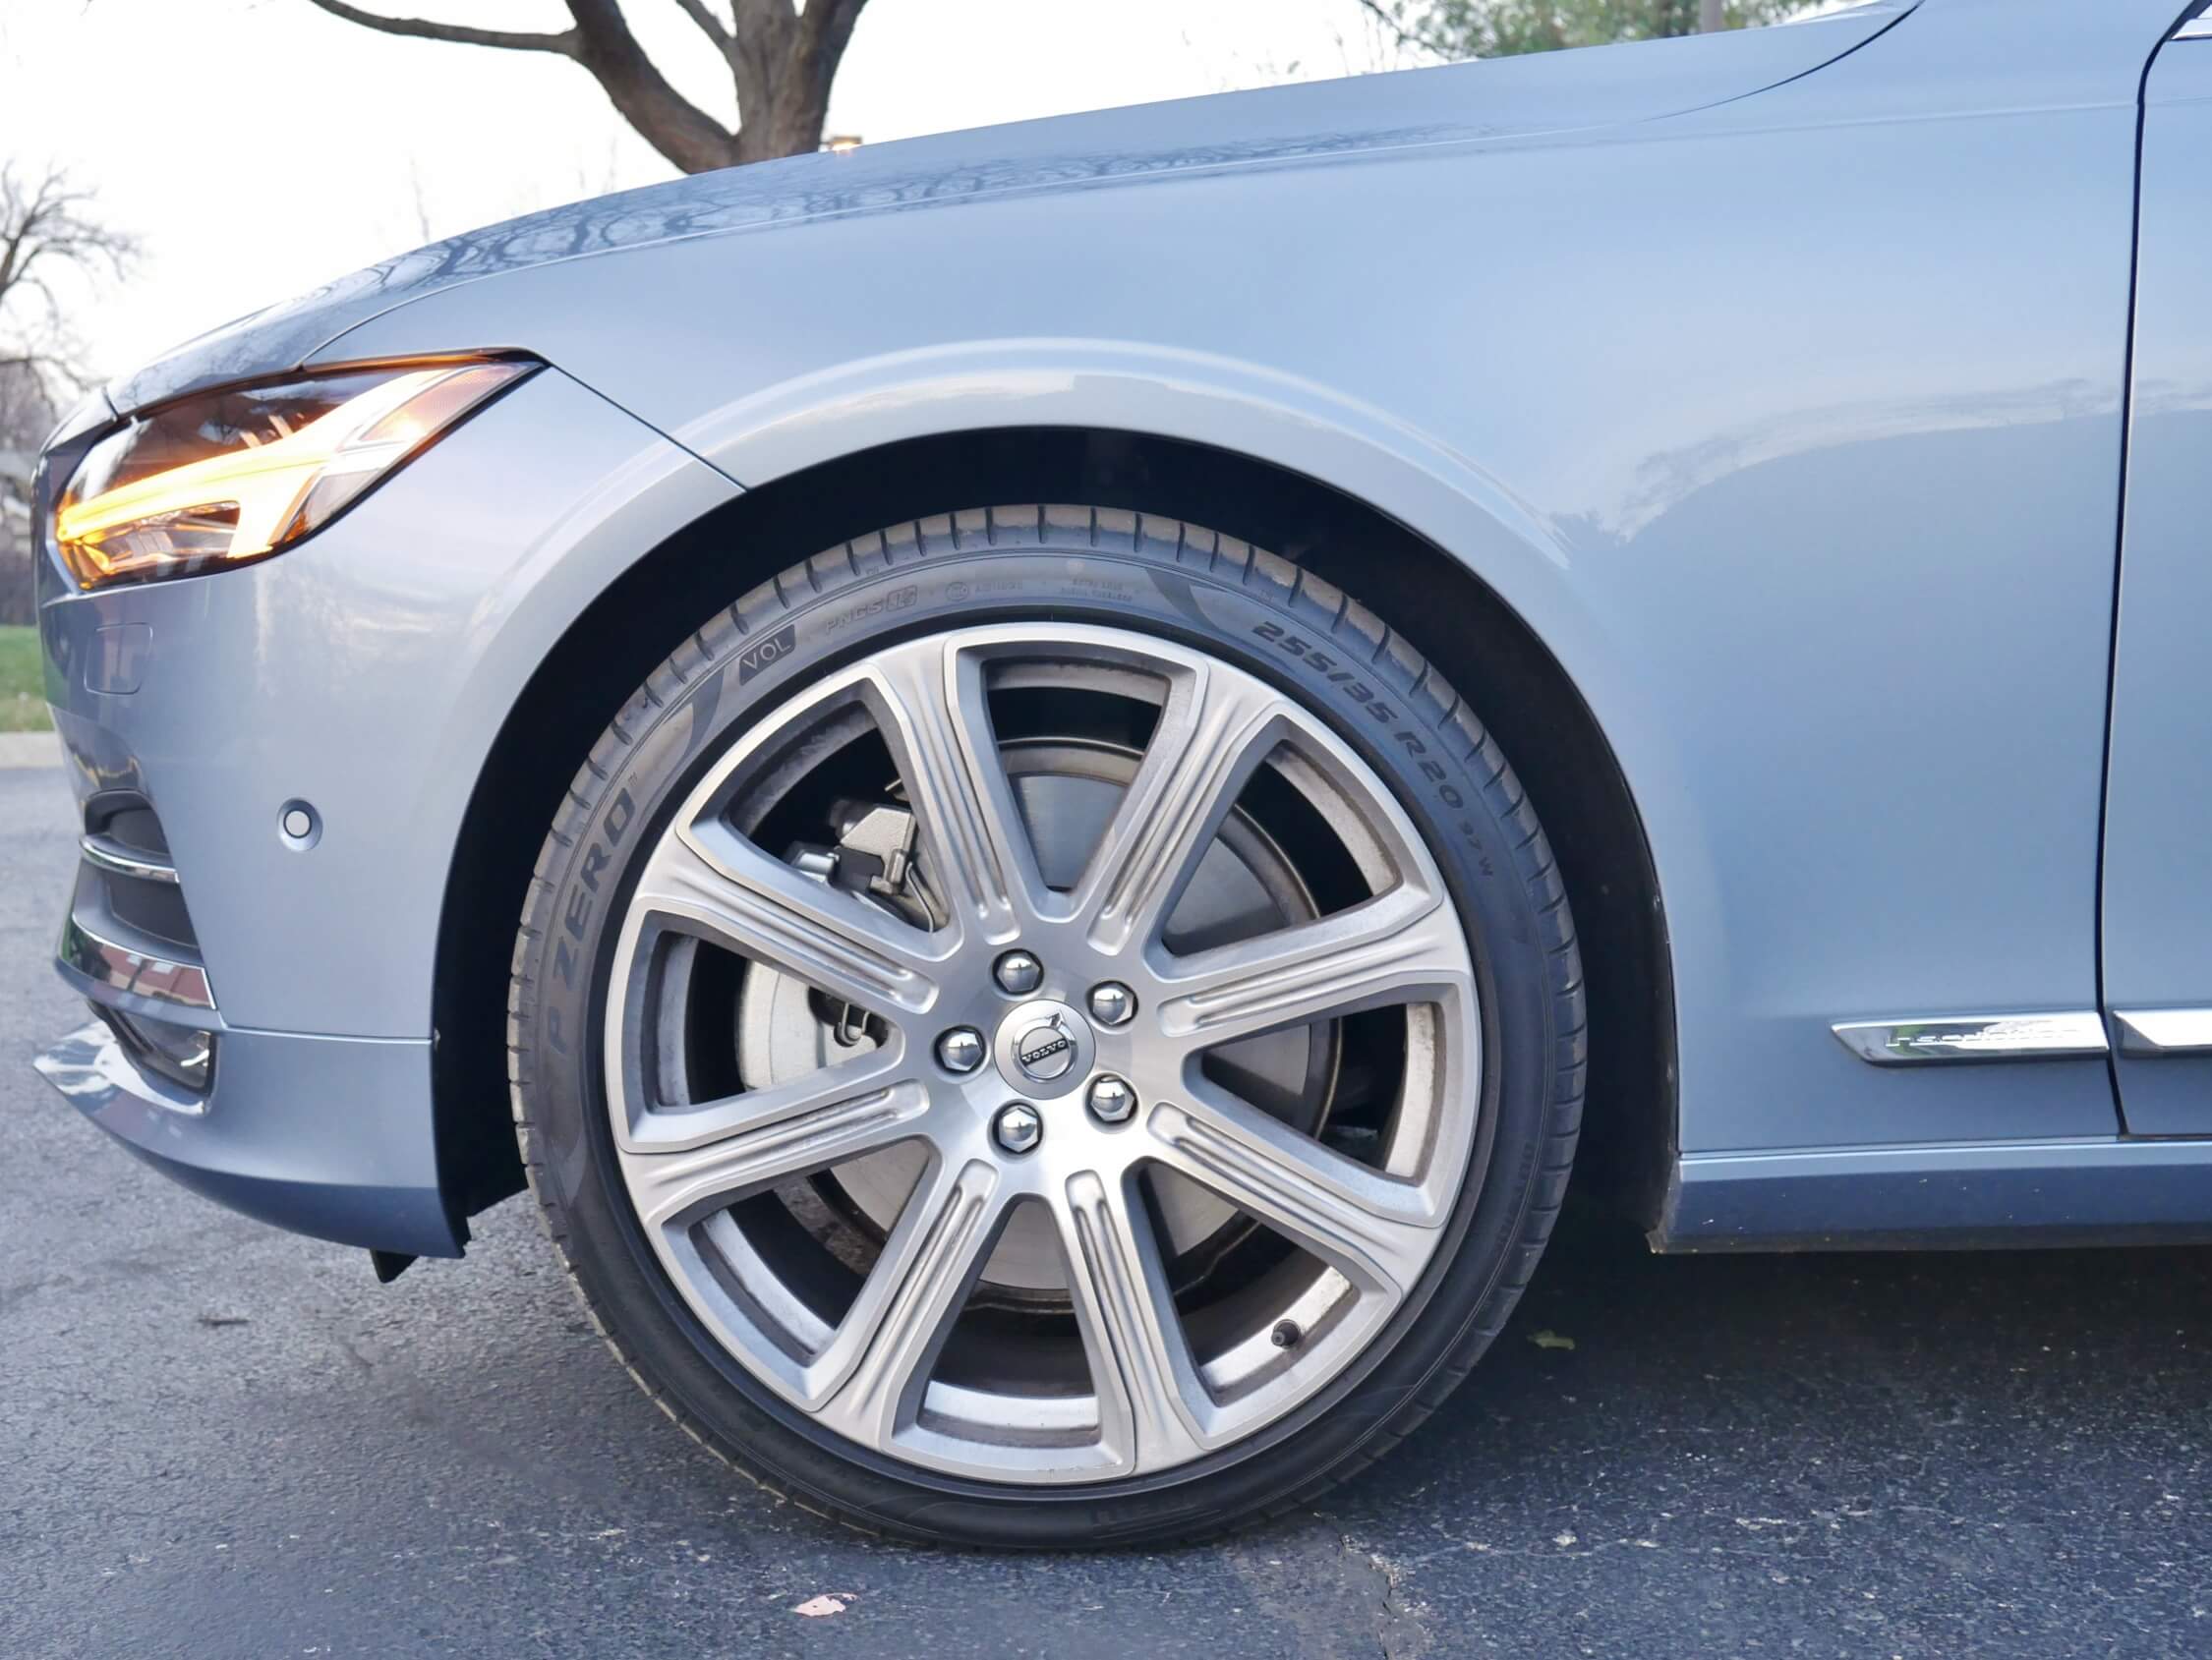 2018 Volvo S90 T6 AWD Inscription: There are even larger wheels than these 20"-inch alloys available; Front 2 wishbone suspension is complemented by an integral axle w/ space saving tranverse leaf spring and available rear air springs